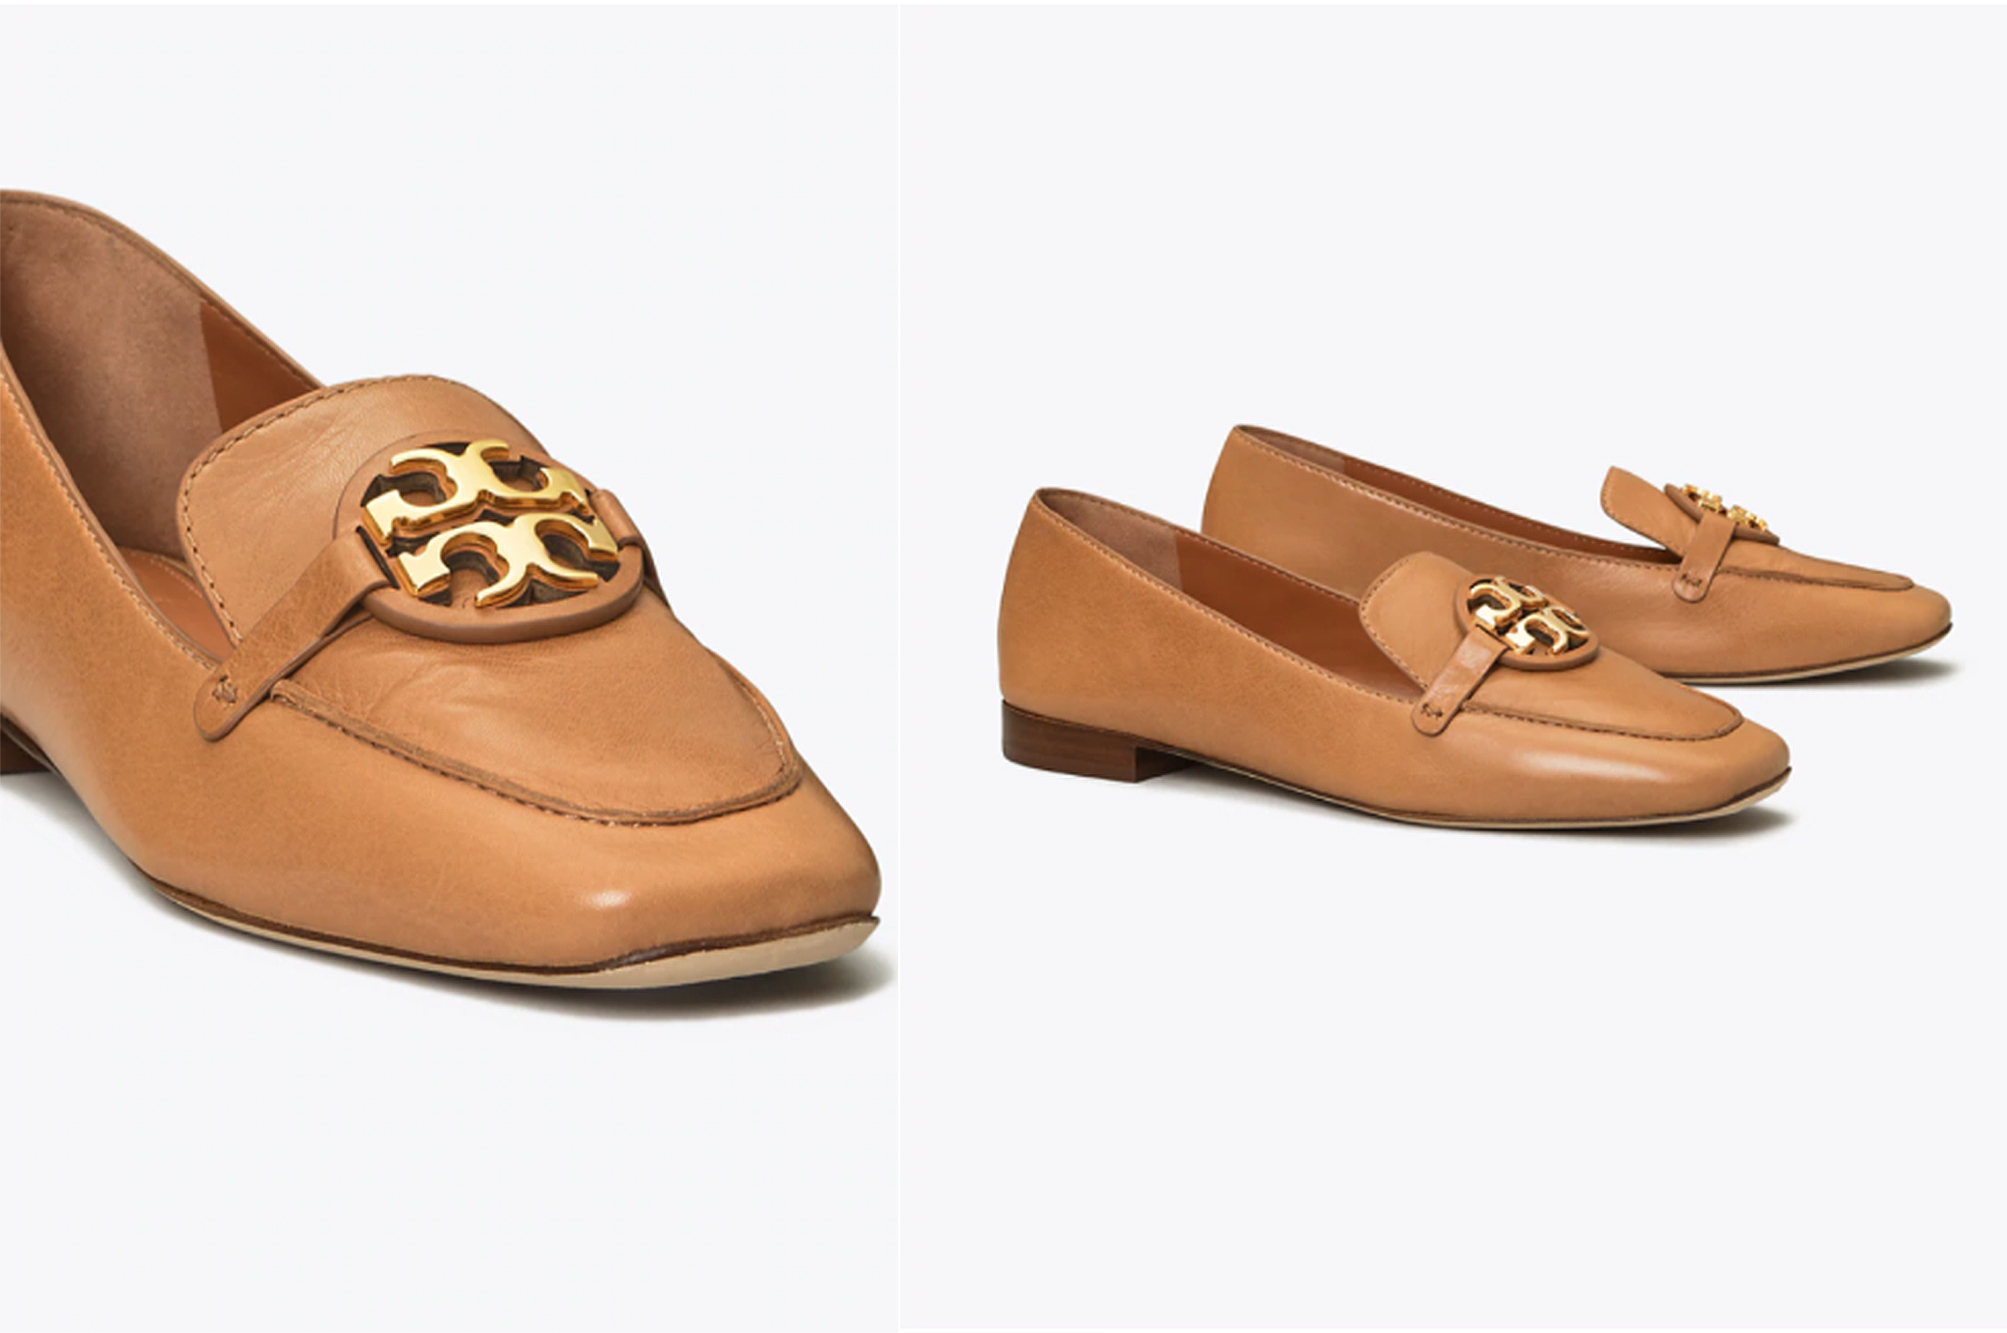 Tory Burch Chic Loafers Are on Sale Just in Time for Fall